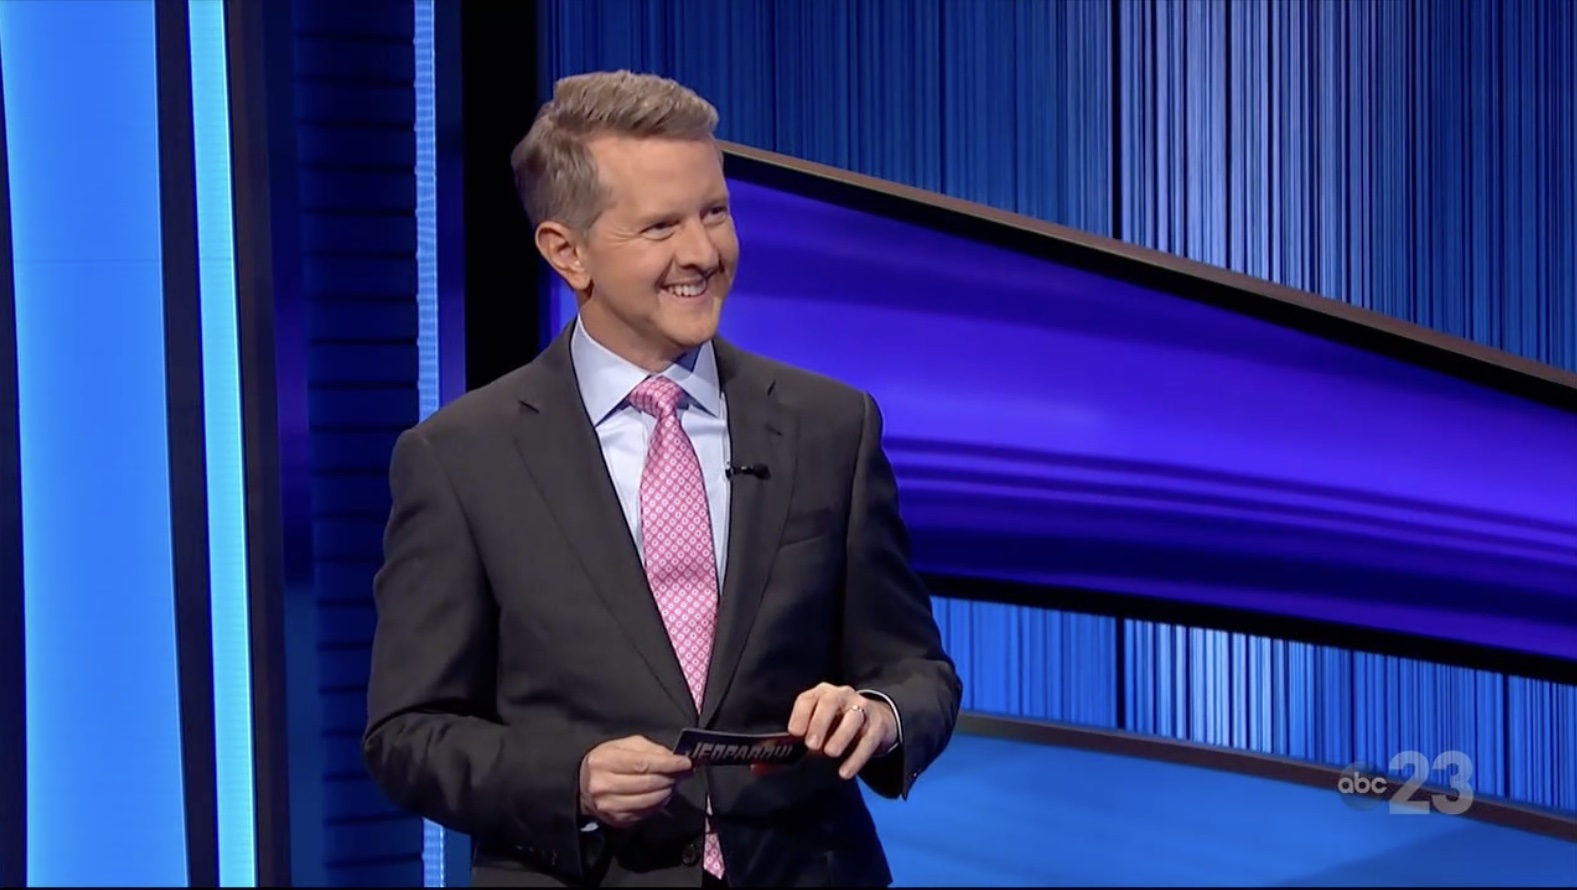 Host Ken Jennings joked: 'There's going to be more hot nerd alerts when this airs!'